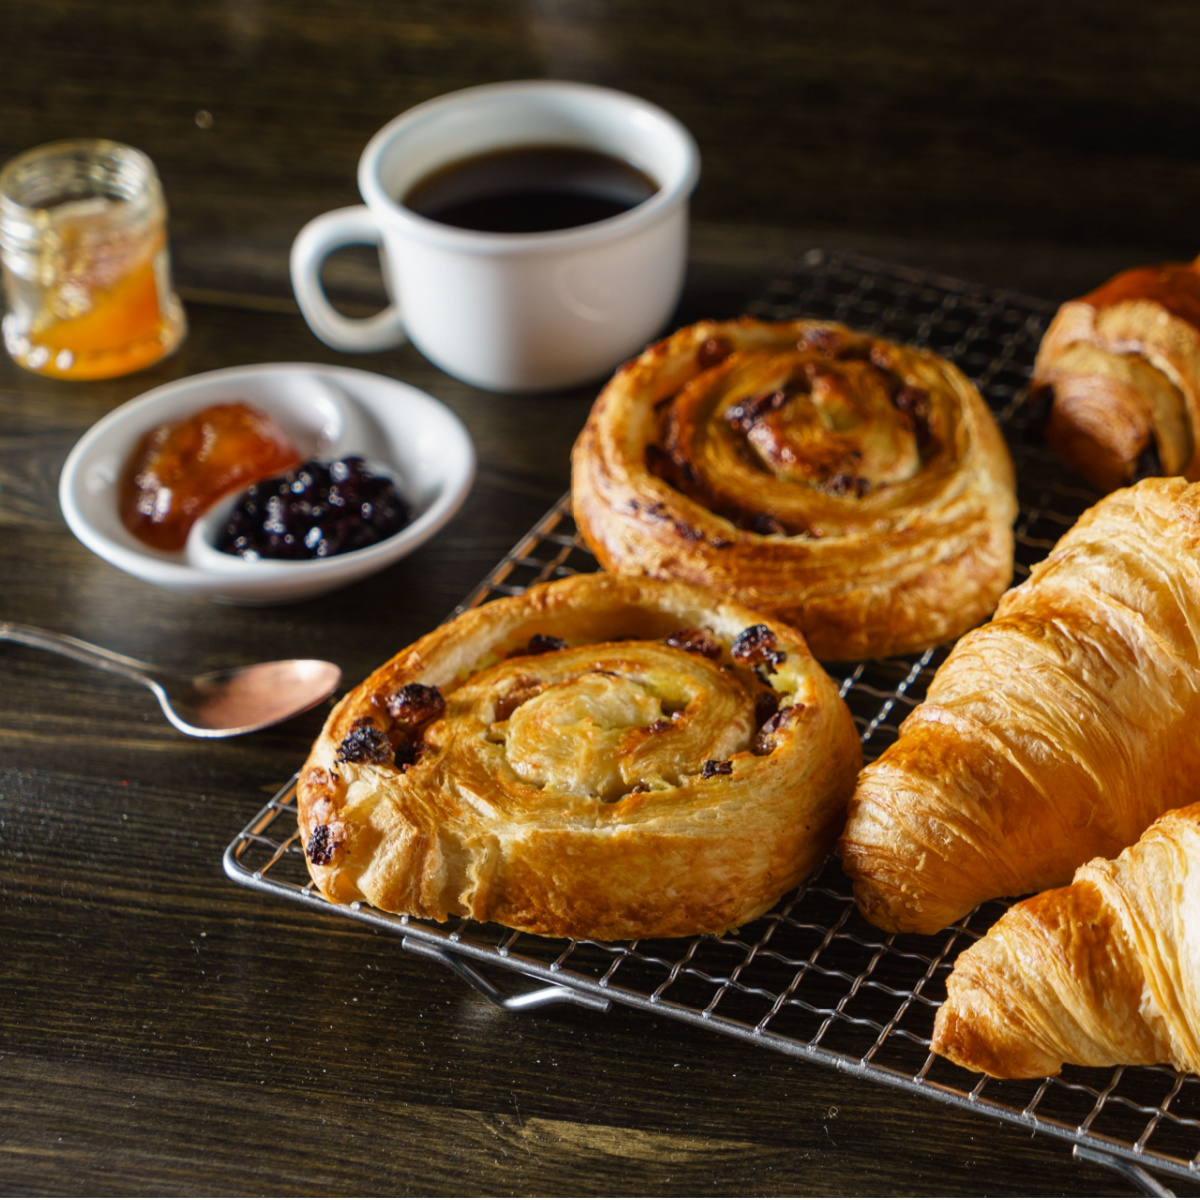 various pastries with coffee and jam